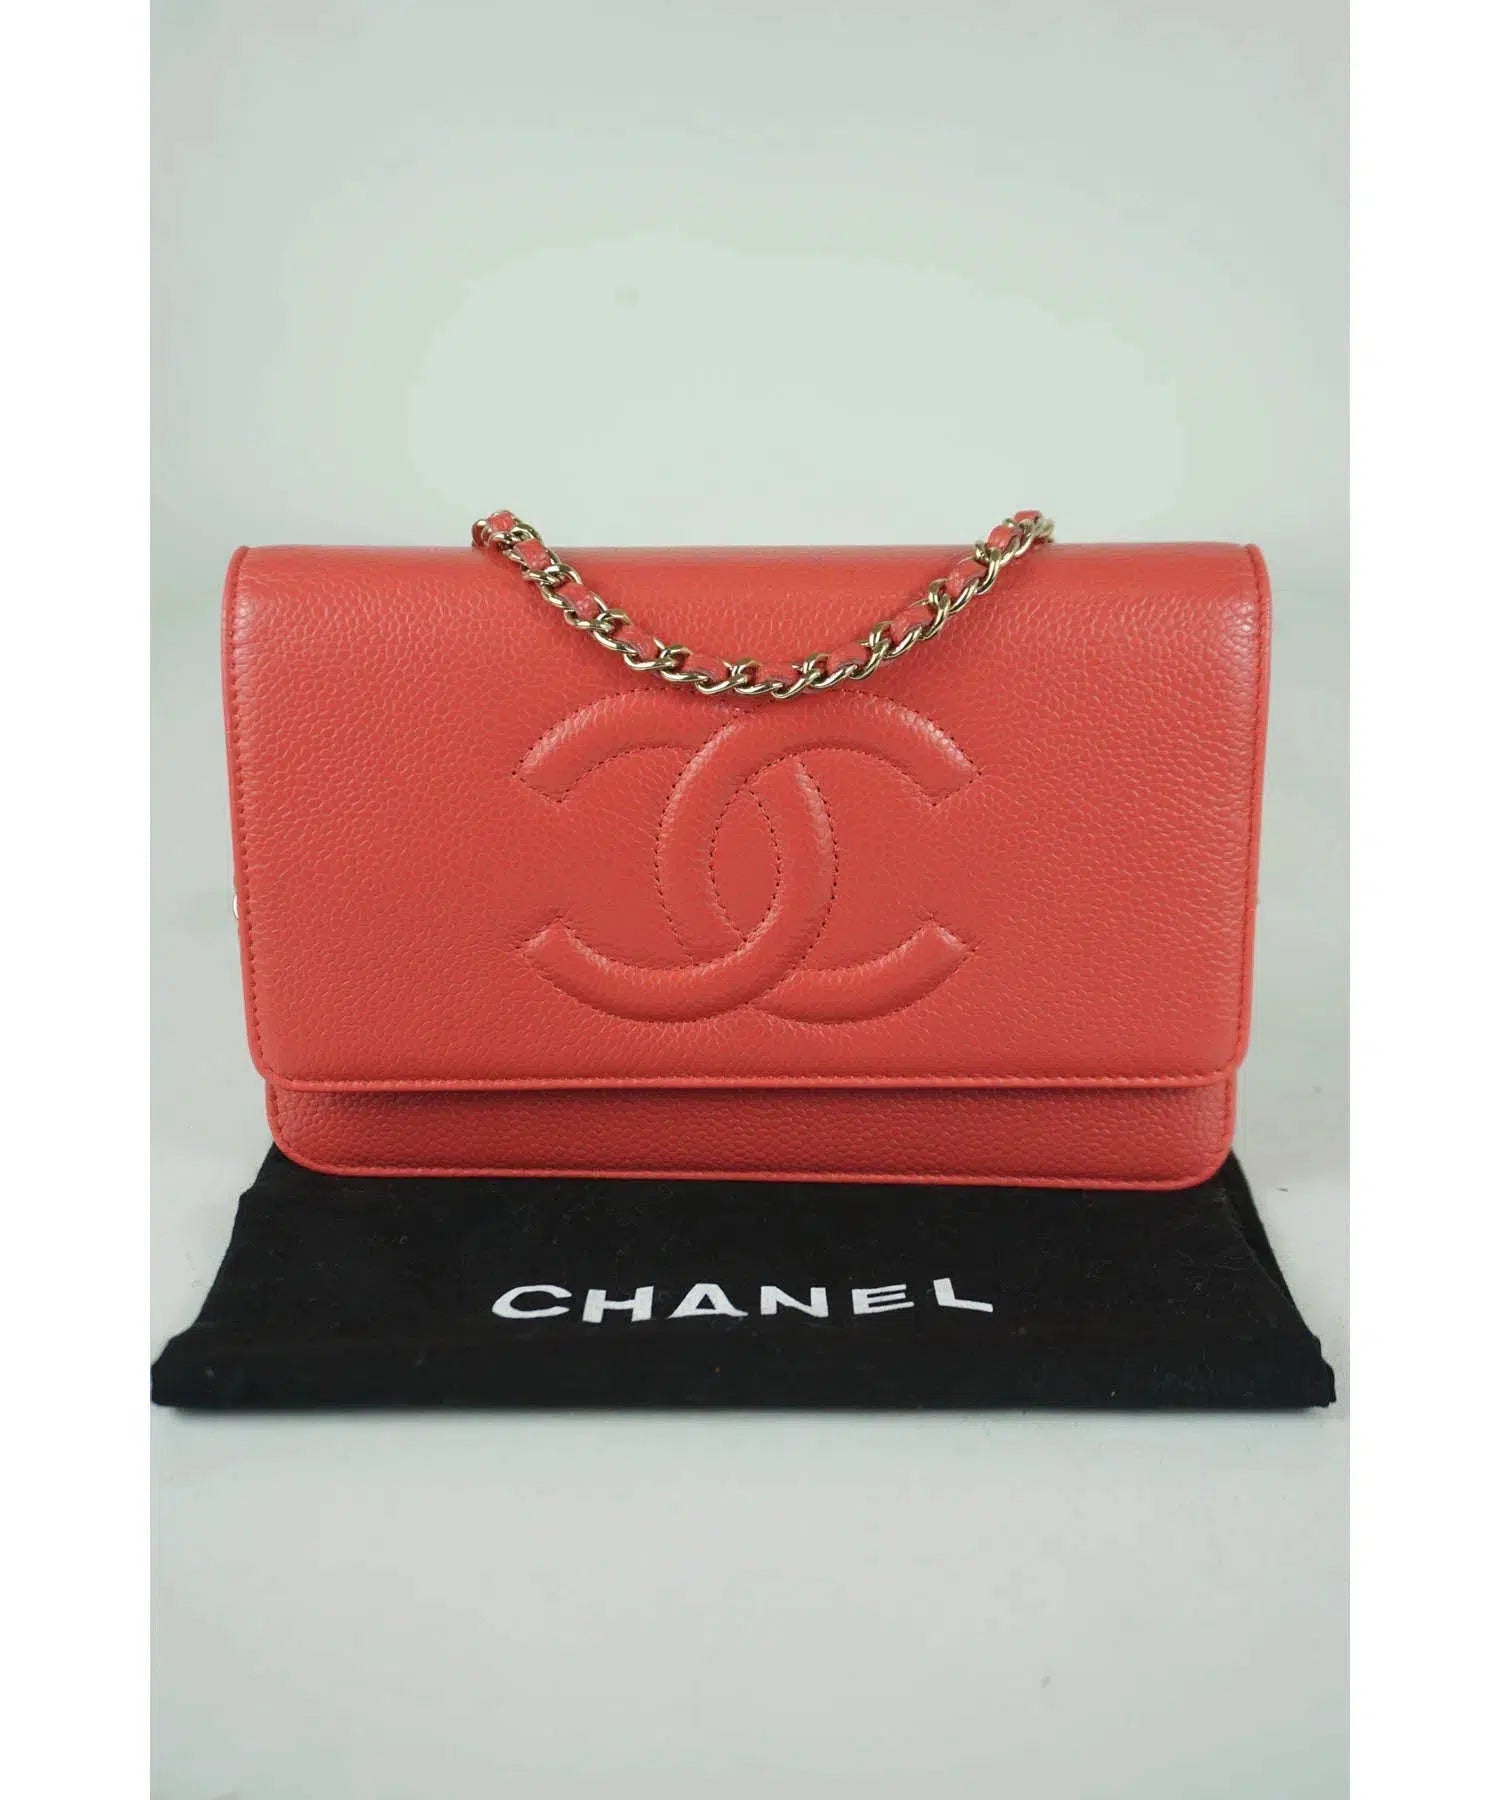 Chanel Caviar Salmon Timeless Wallet on a Chain 2014-15